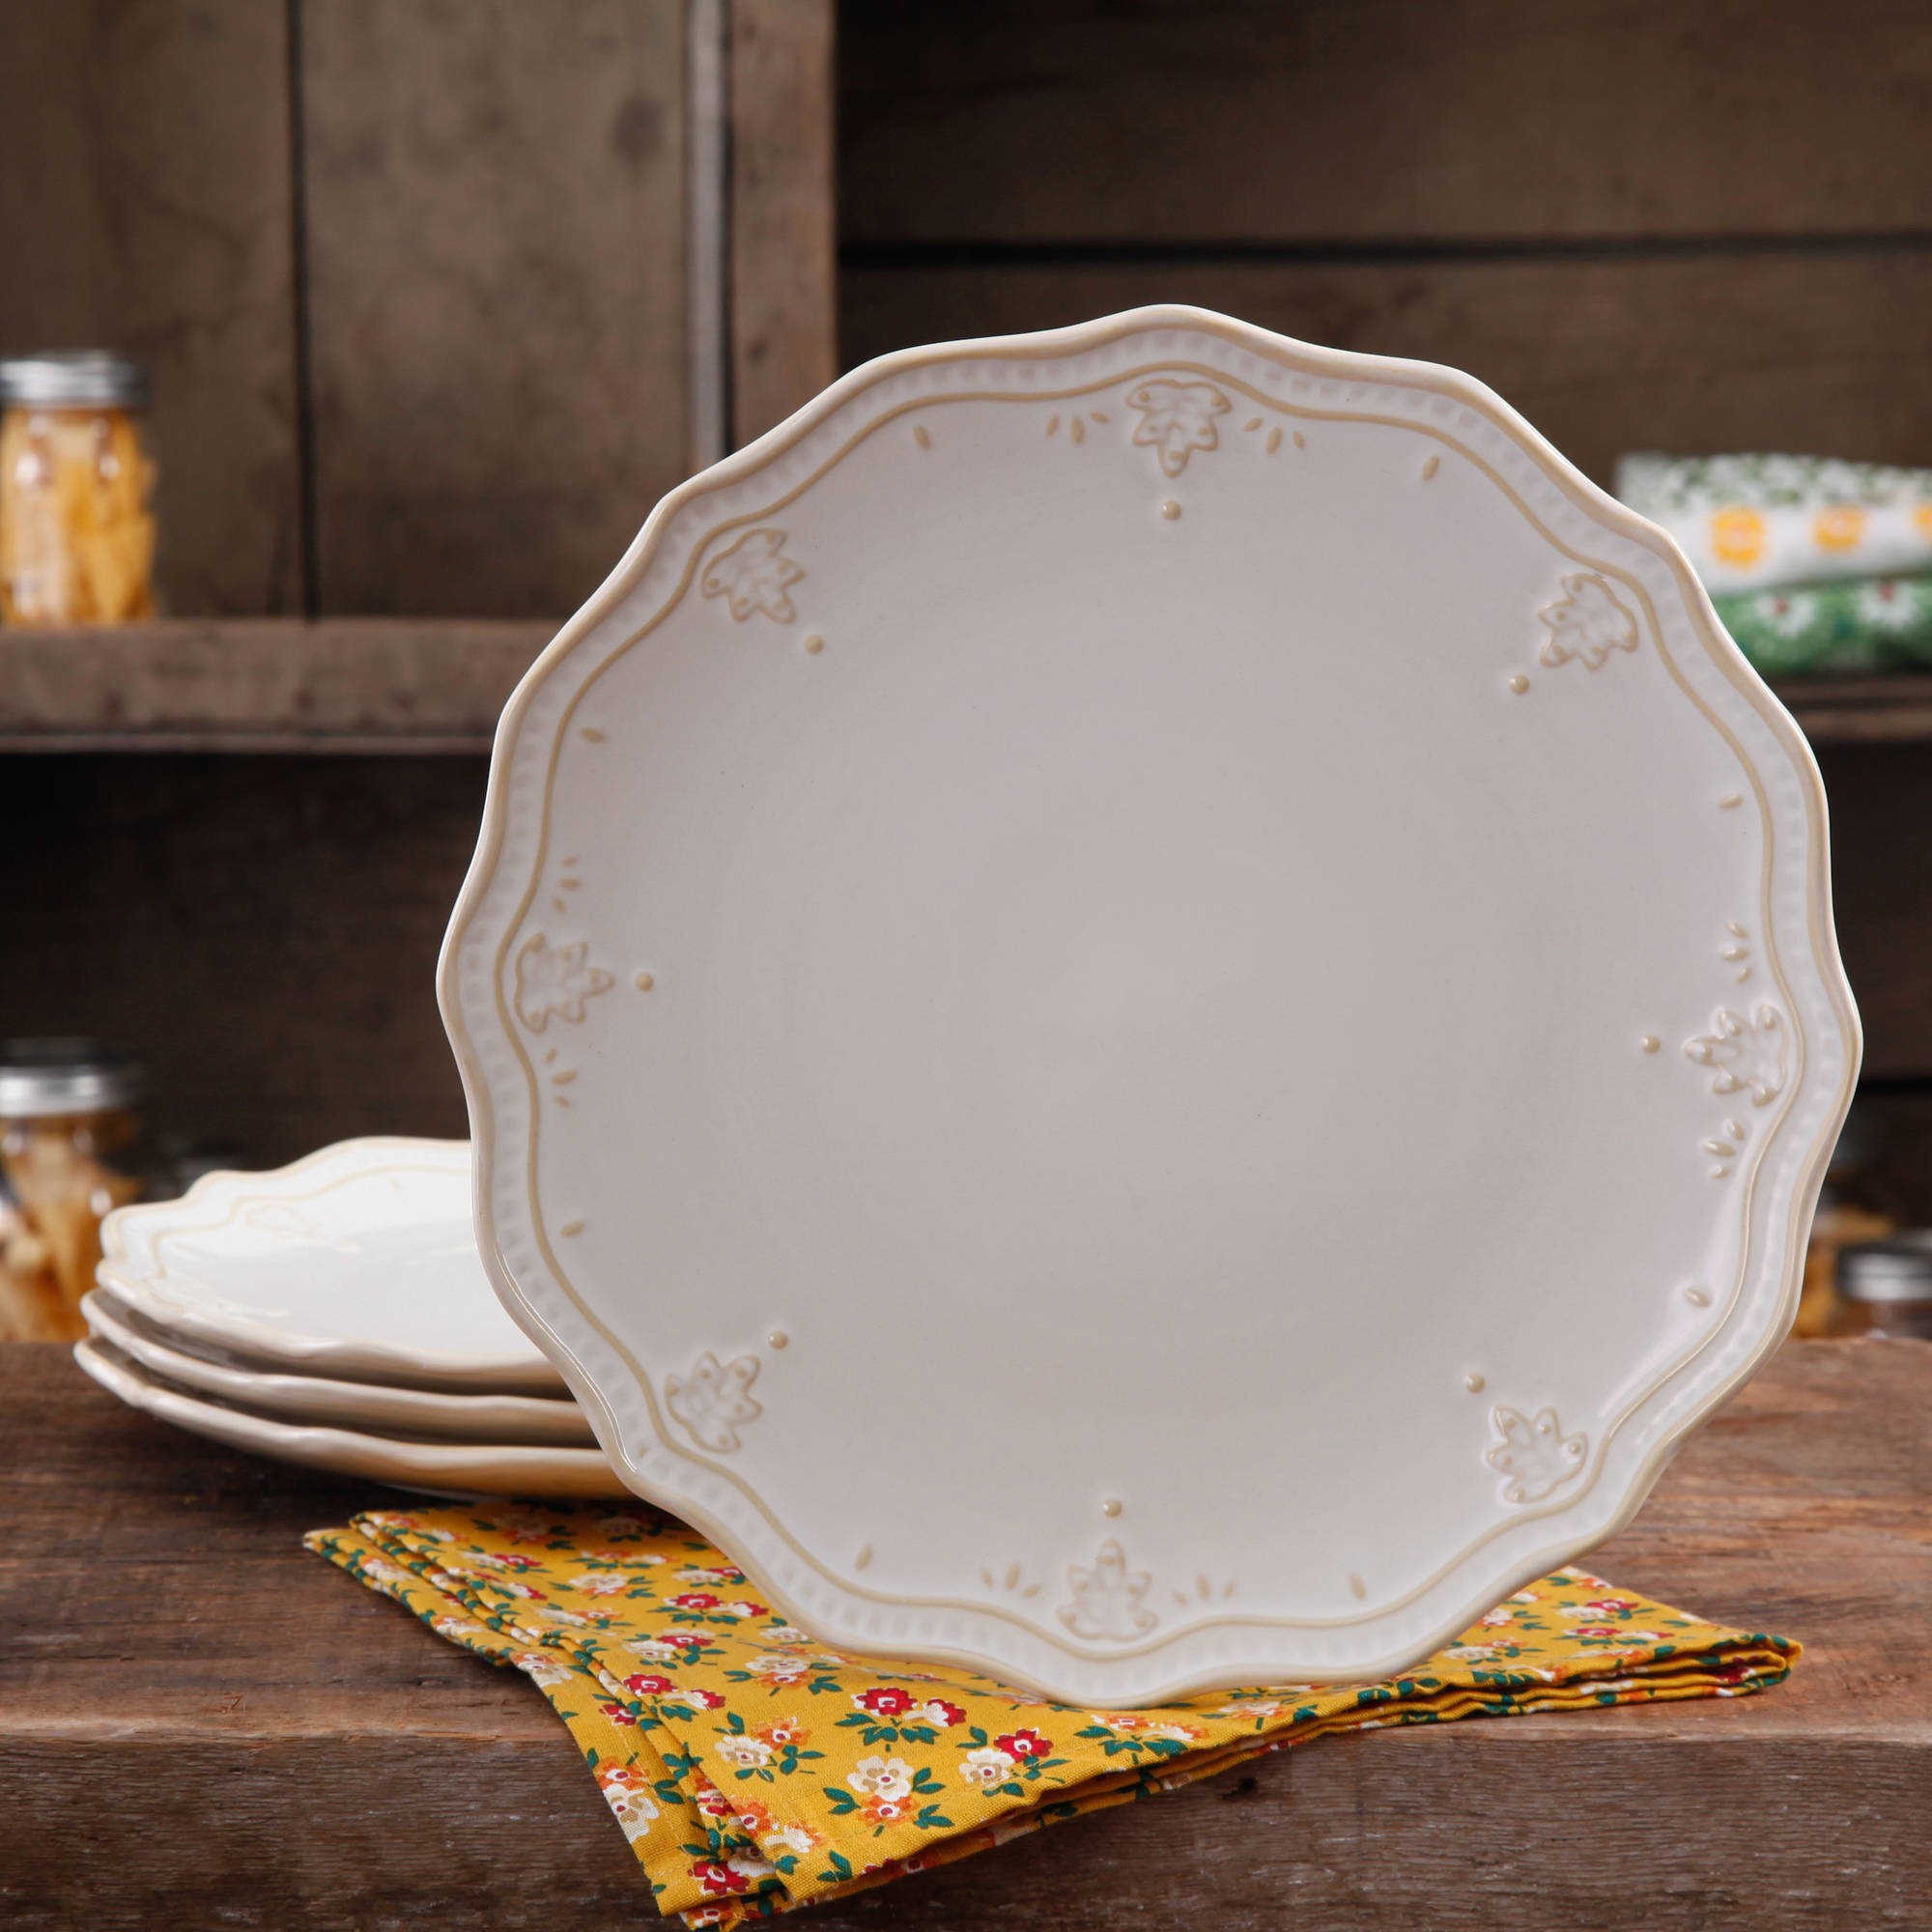 The Pioneer Woman Farmhouse Lace 4-Piece Dinner Plate Set - image 3 of 4